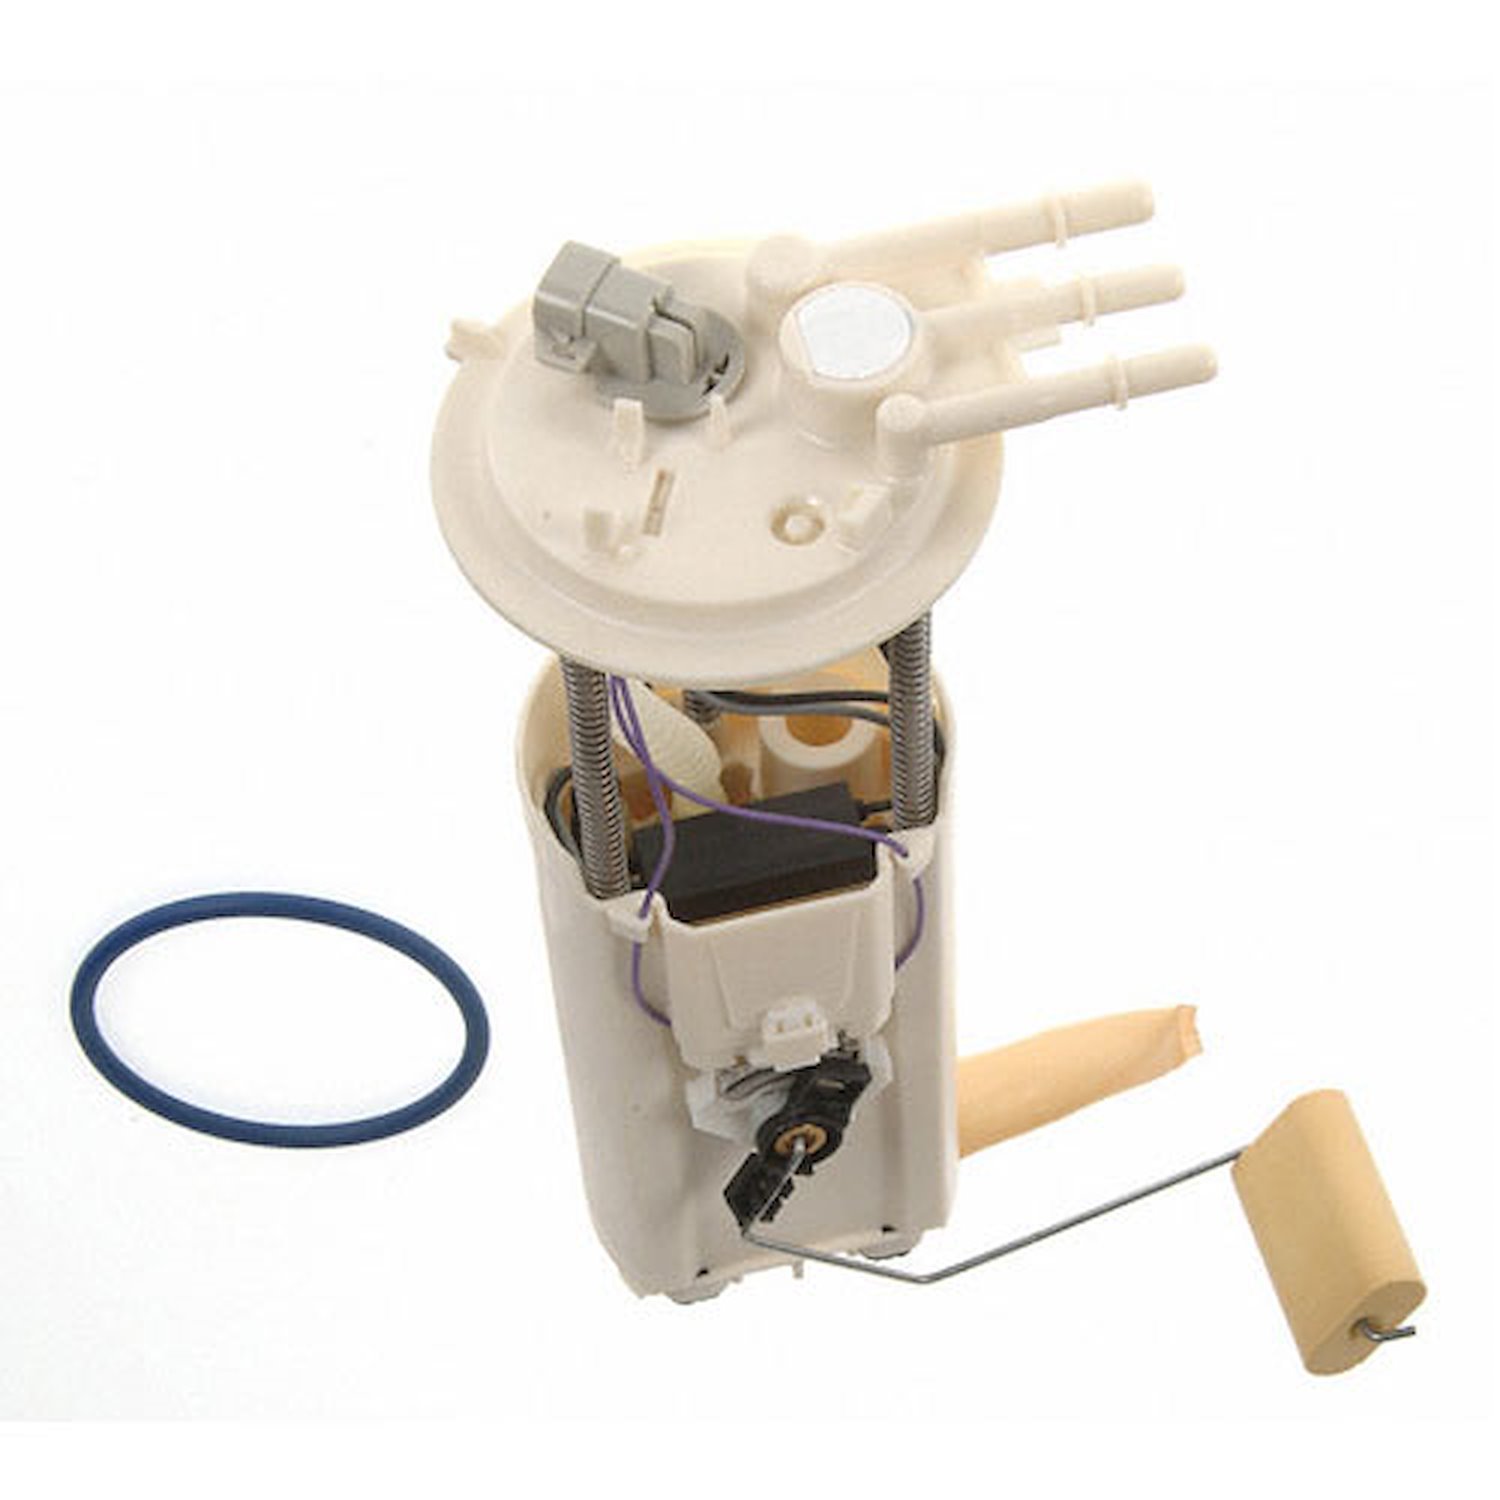 OE GM Replacement Electric Fuel Pump Module Assembly 1997 Buick Regal 231cid 3.8L V6